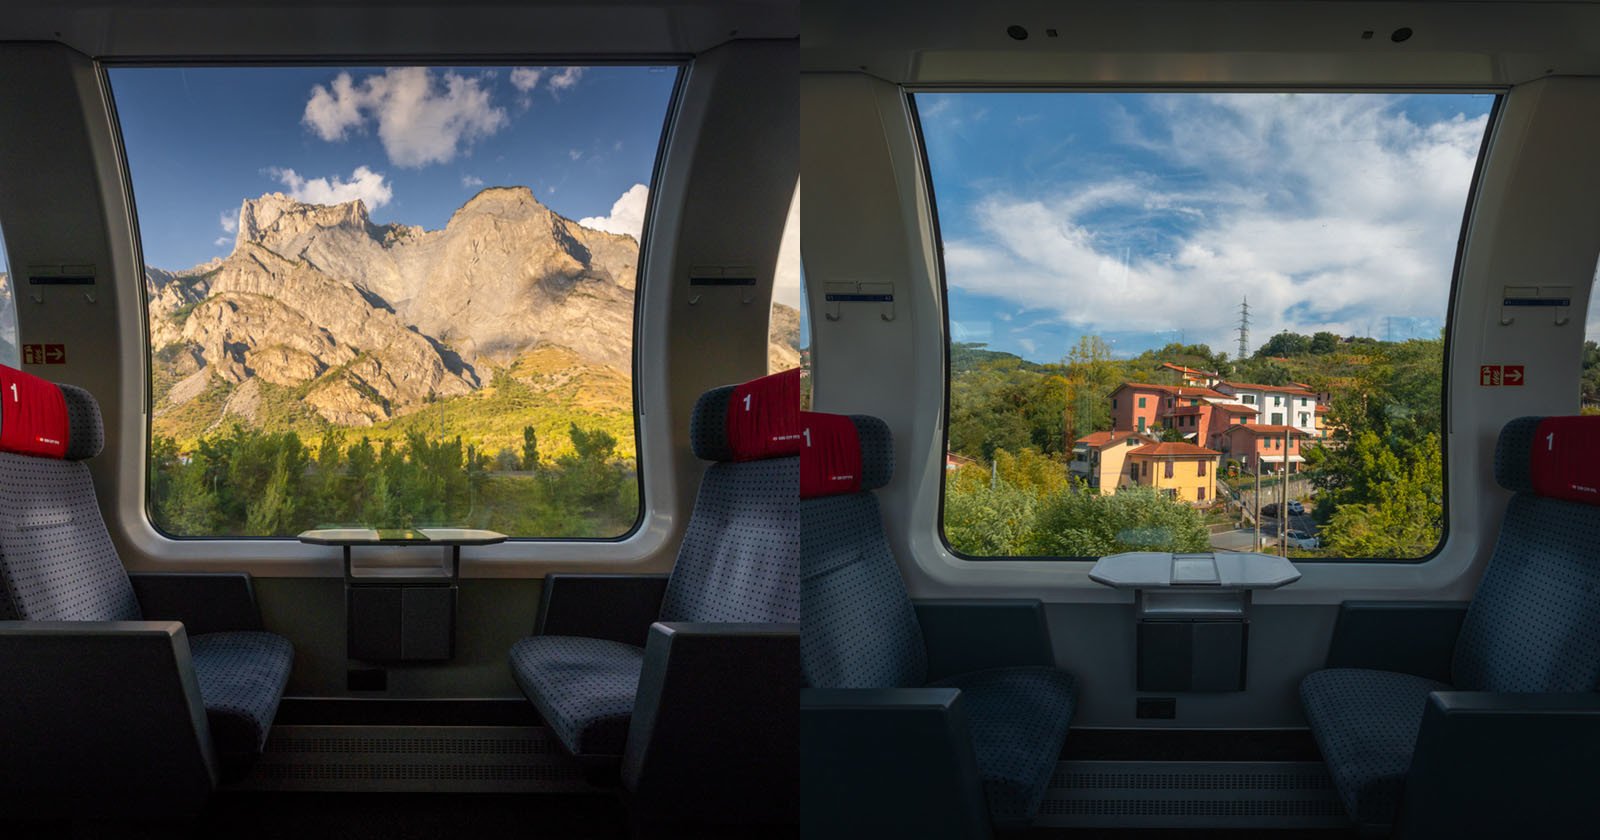 Photographing Landscapes Through a Train Window Across Europe